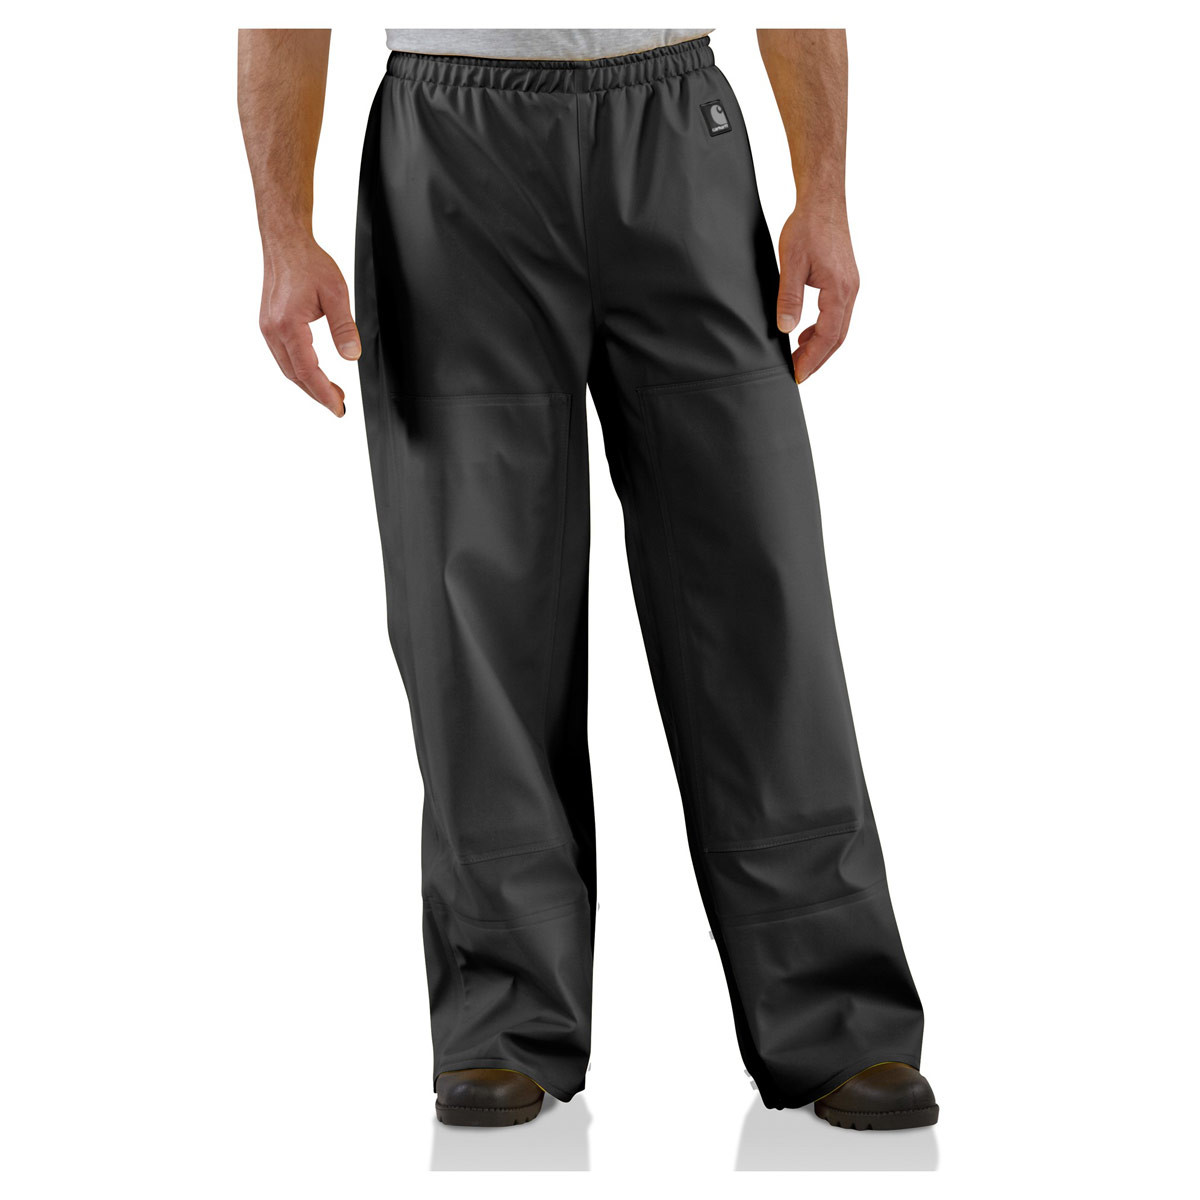 Carhartt Work Pants with Openings for Knee Pads 